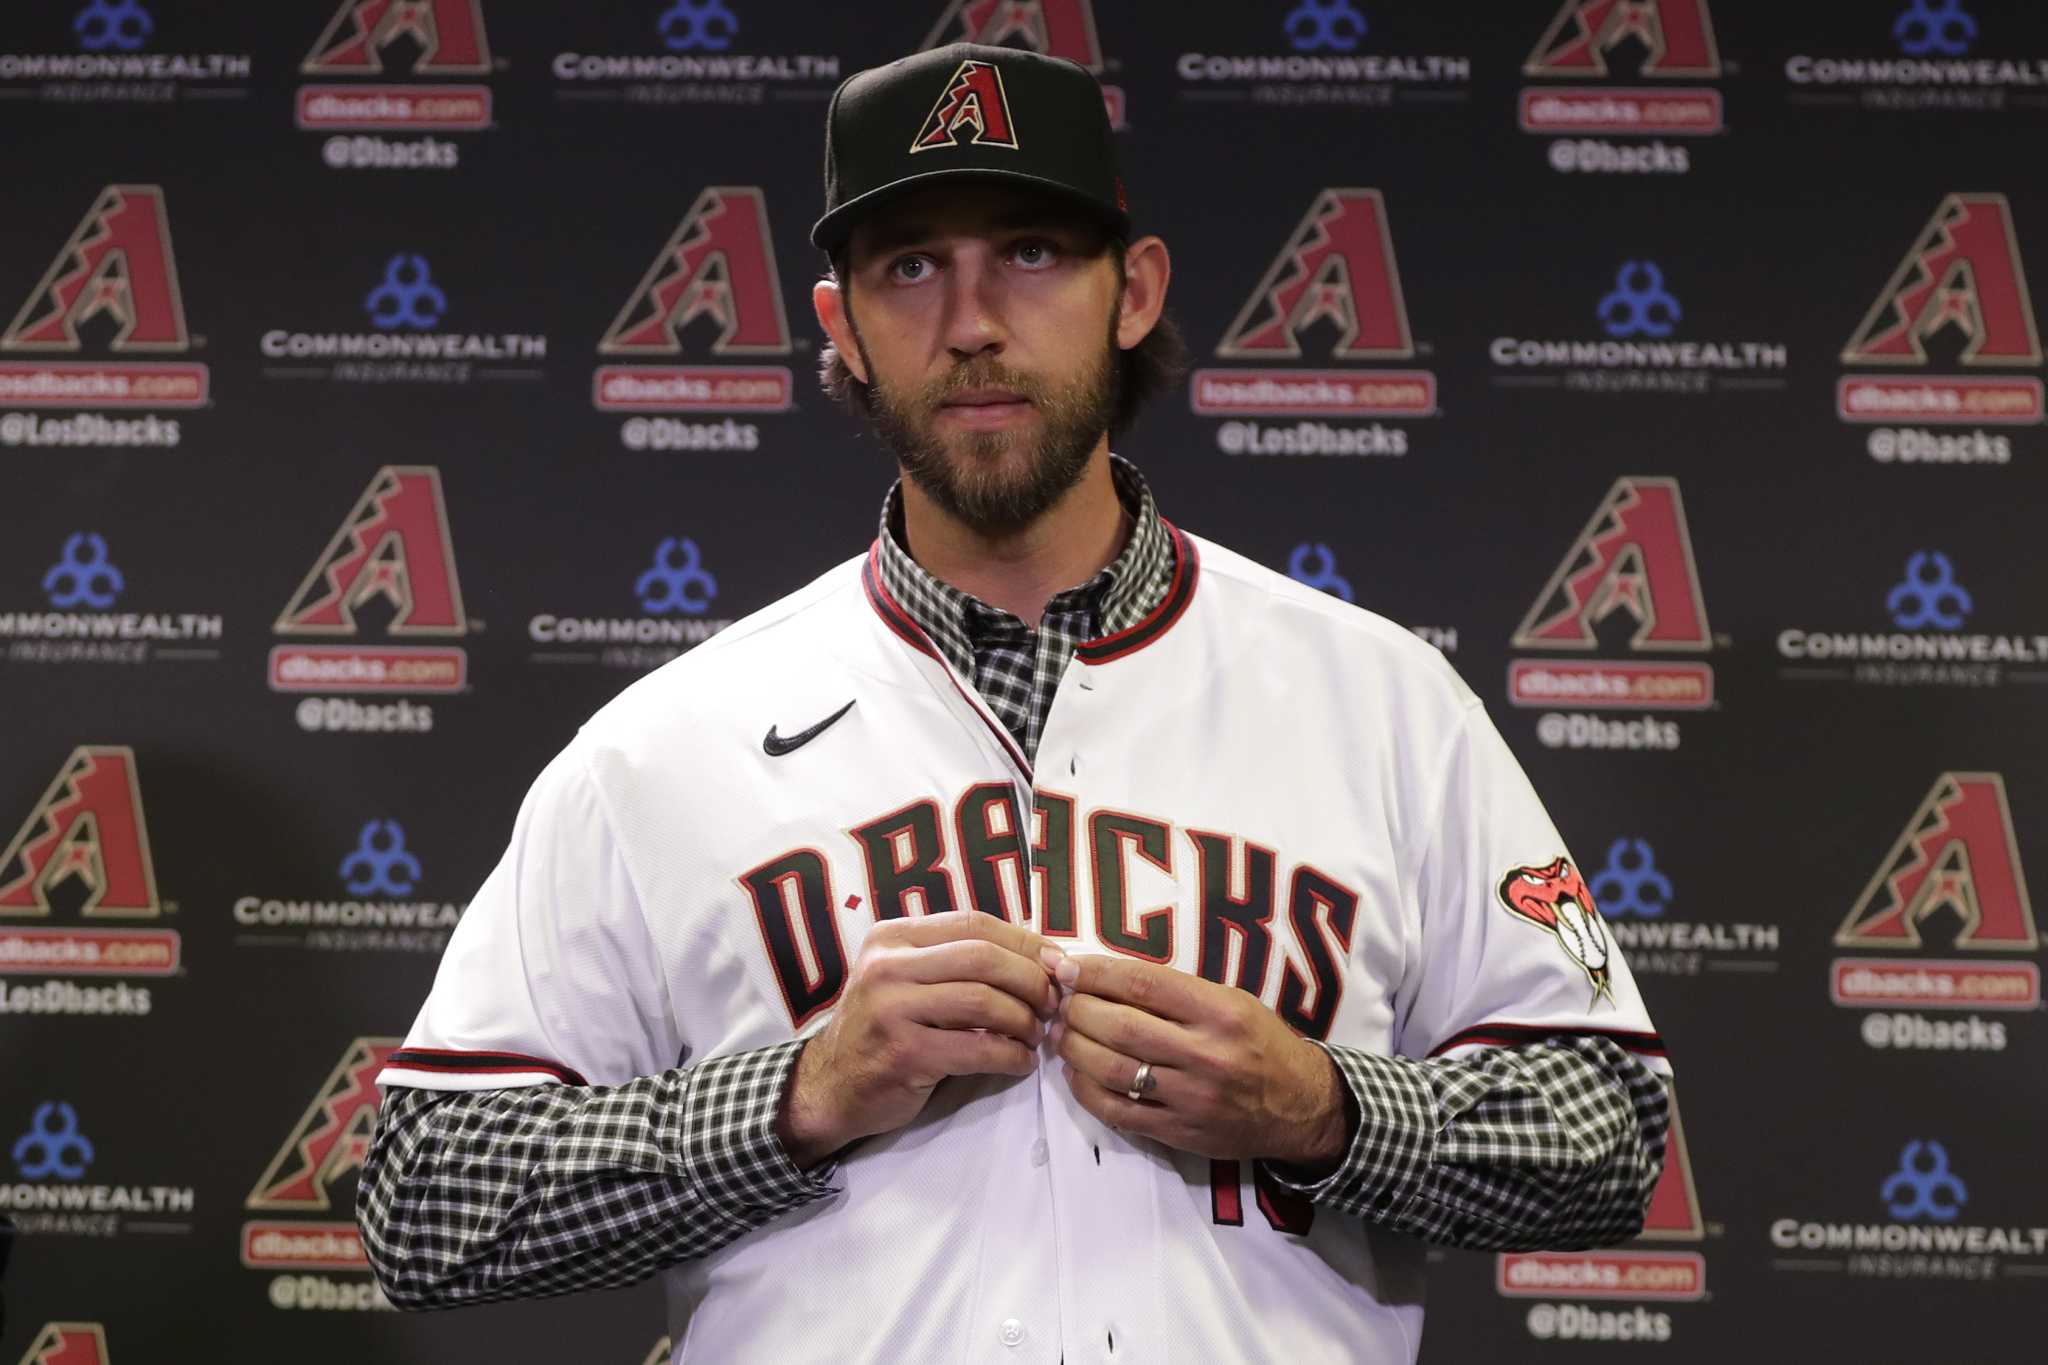 Ex-teammates, insiders speculate on why Madison Bumgarner left San Francisco